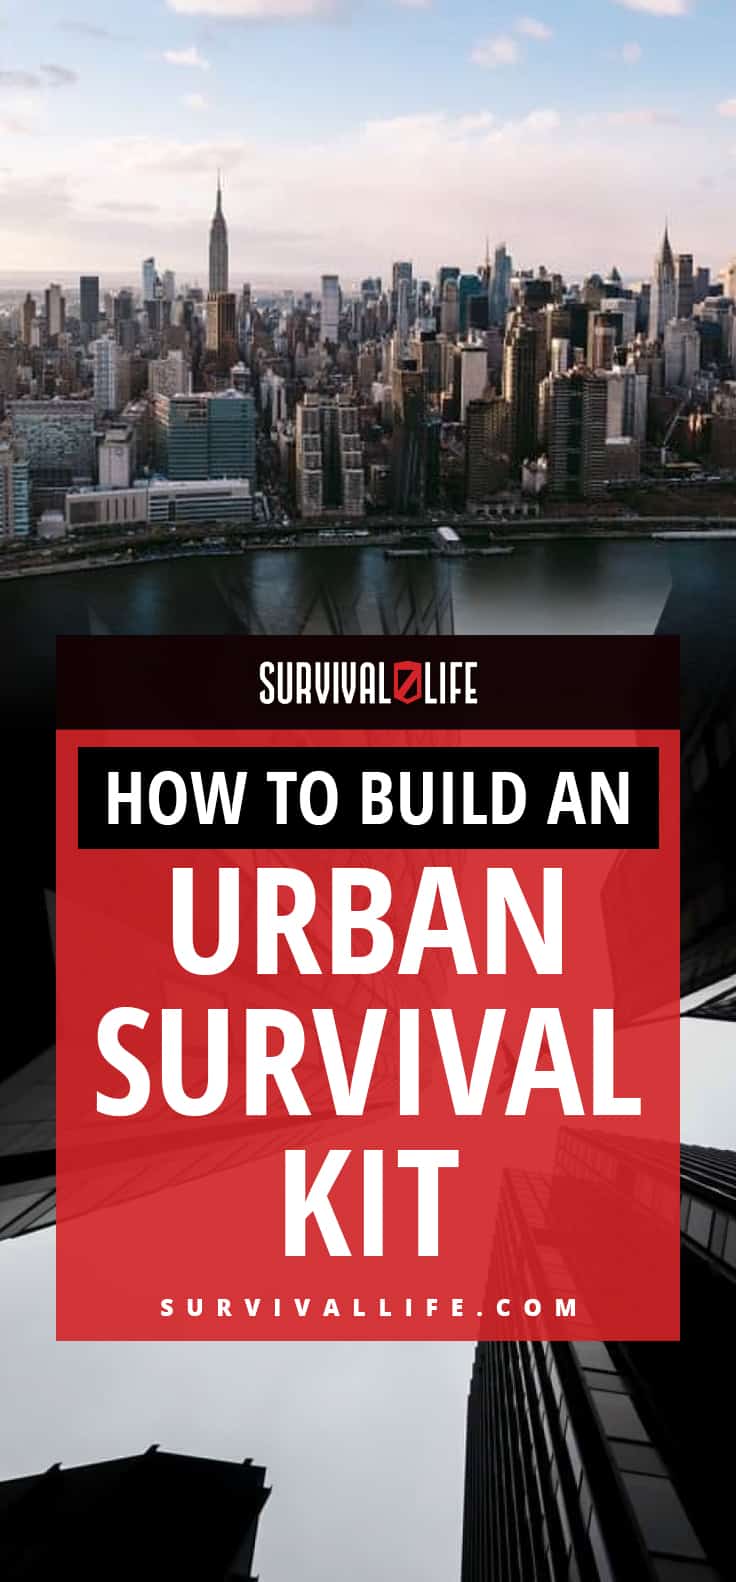 How To Build An Urban Survival Kit | https://survivallife.com/how-to-build-an-urban-survival-kit/